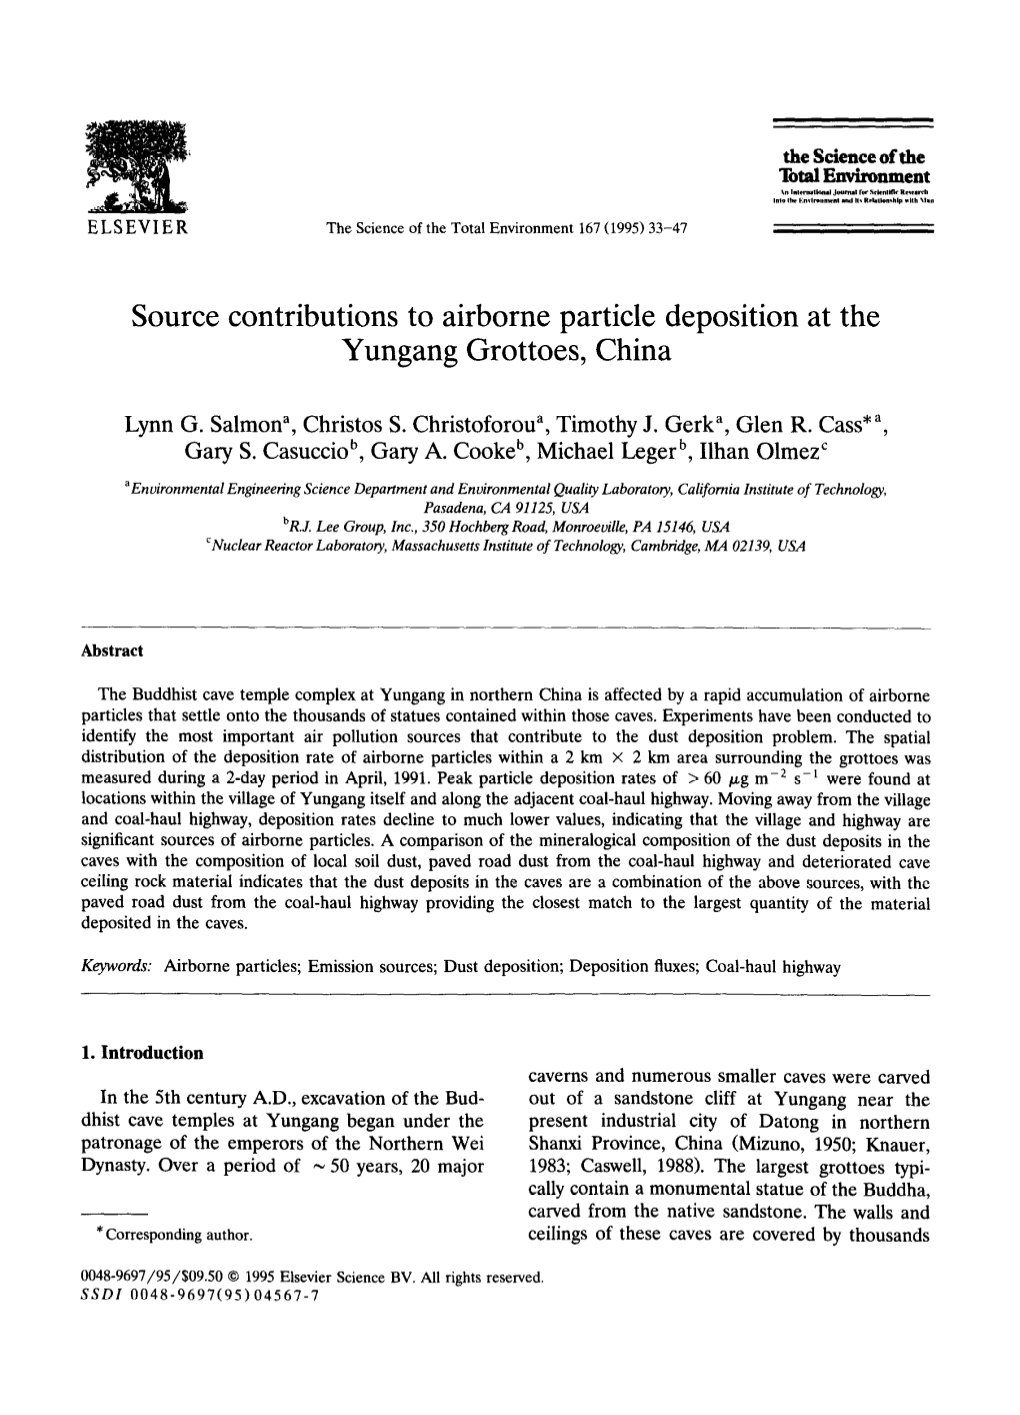 Source Contributions to Airborne Particle Deposition at the Yungang Grottoes, China